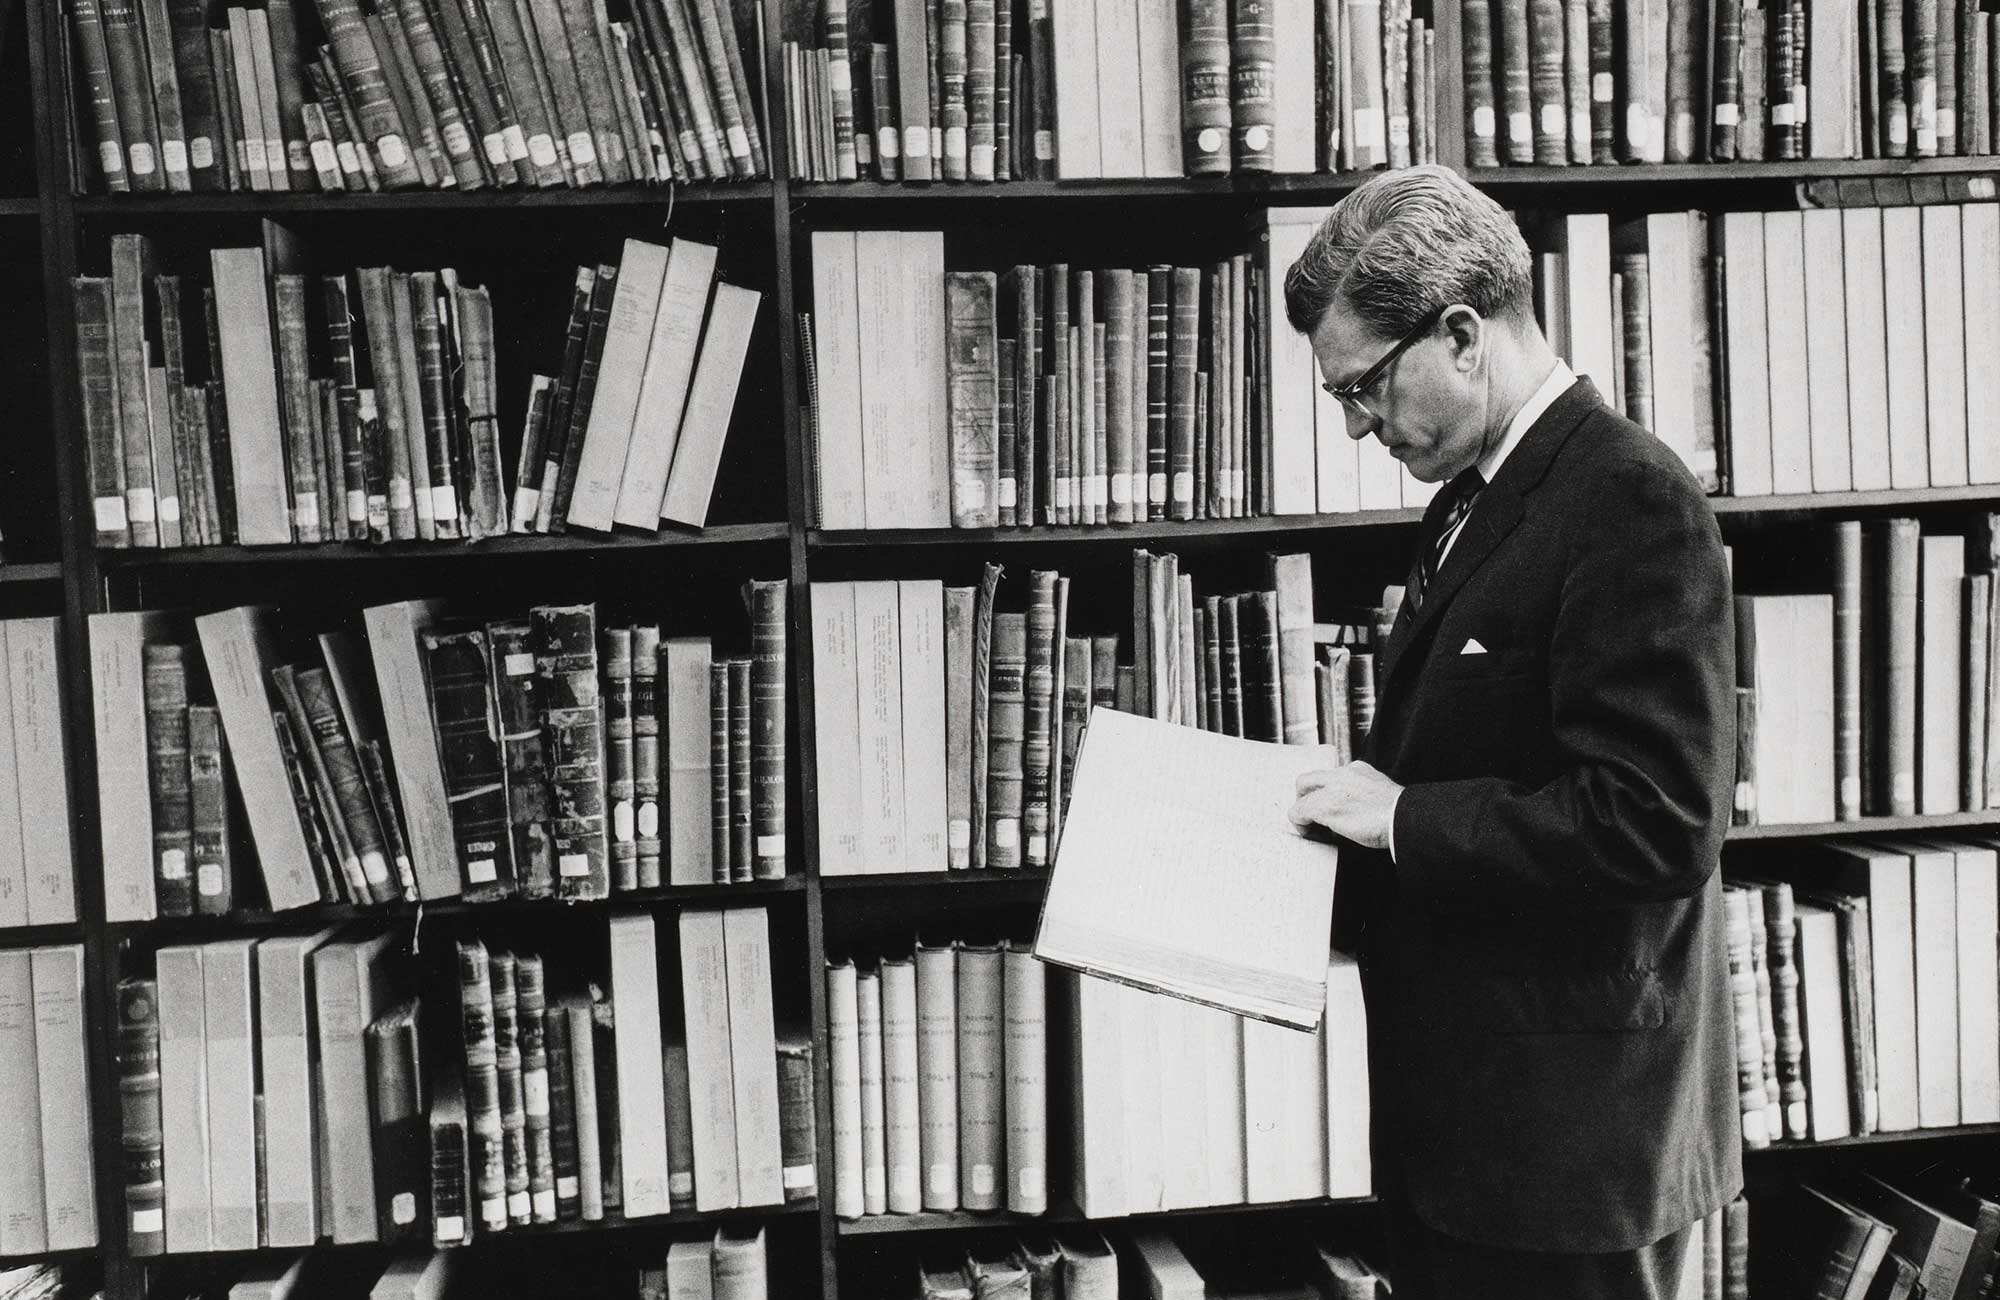 Black and white photograph of HBS Professor Kenneth Andrews reading a book in front of a bookshelf.